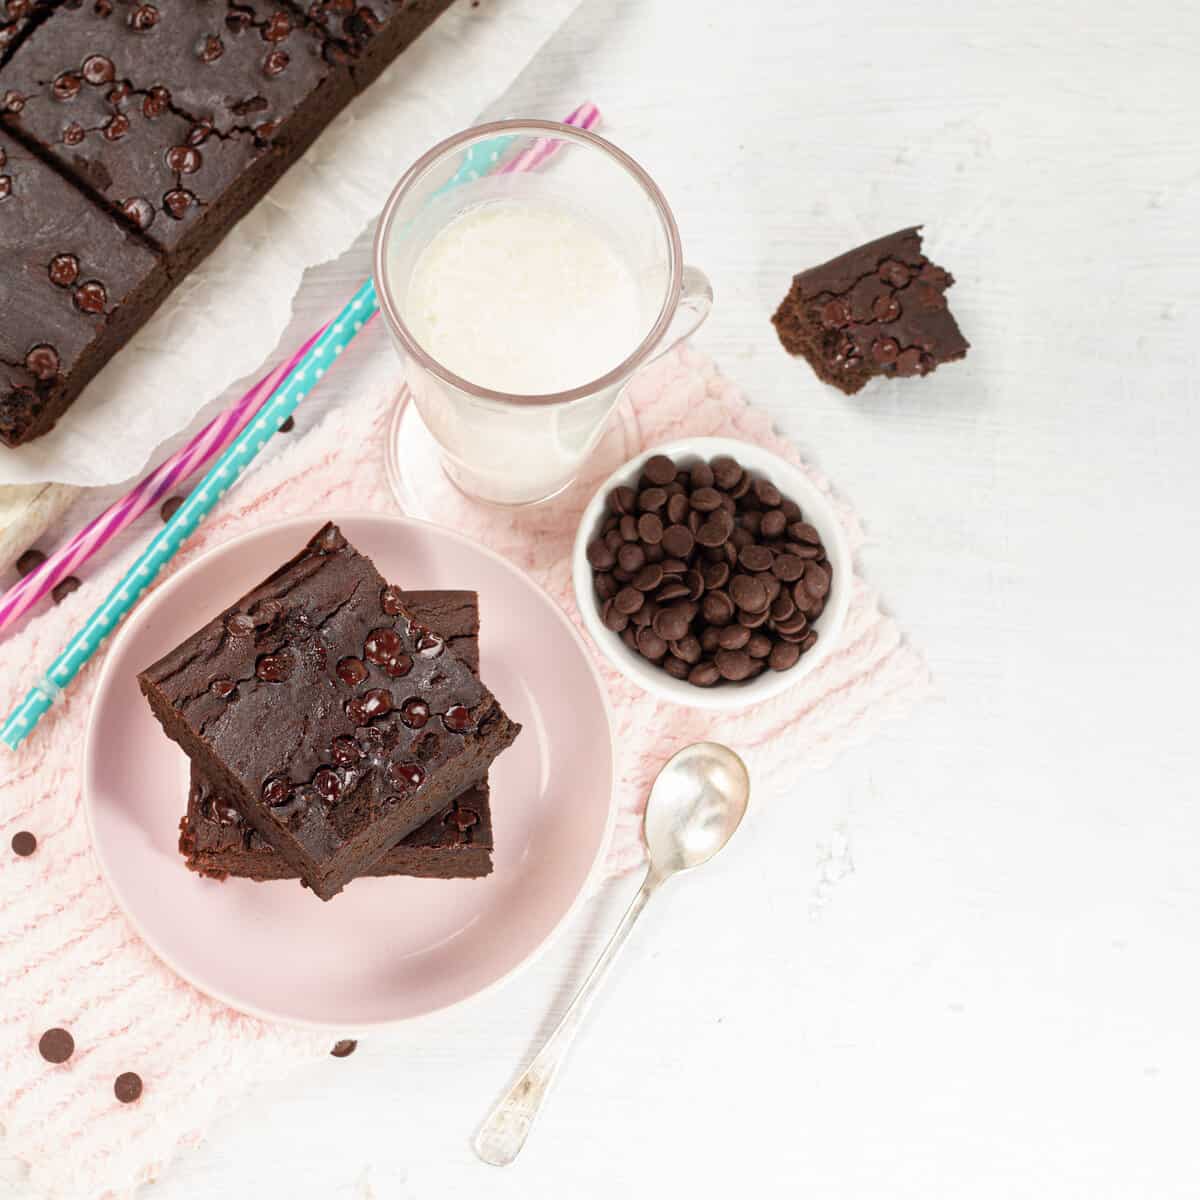 Blender Black Bean Brownies served in a plate with milk glass